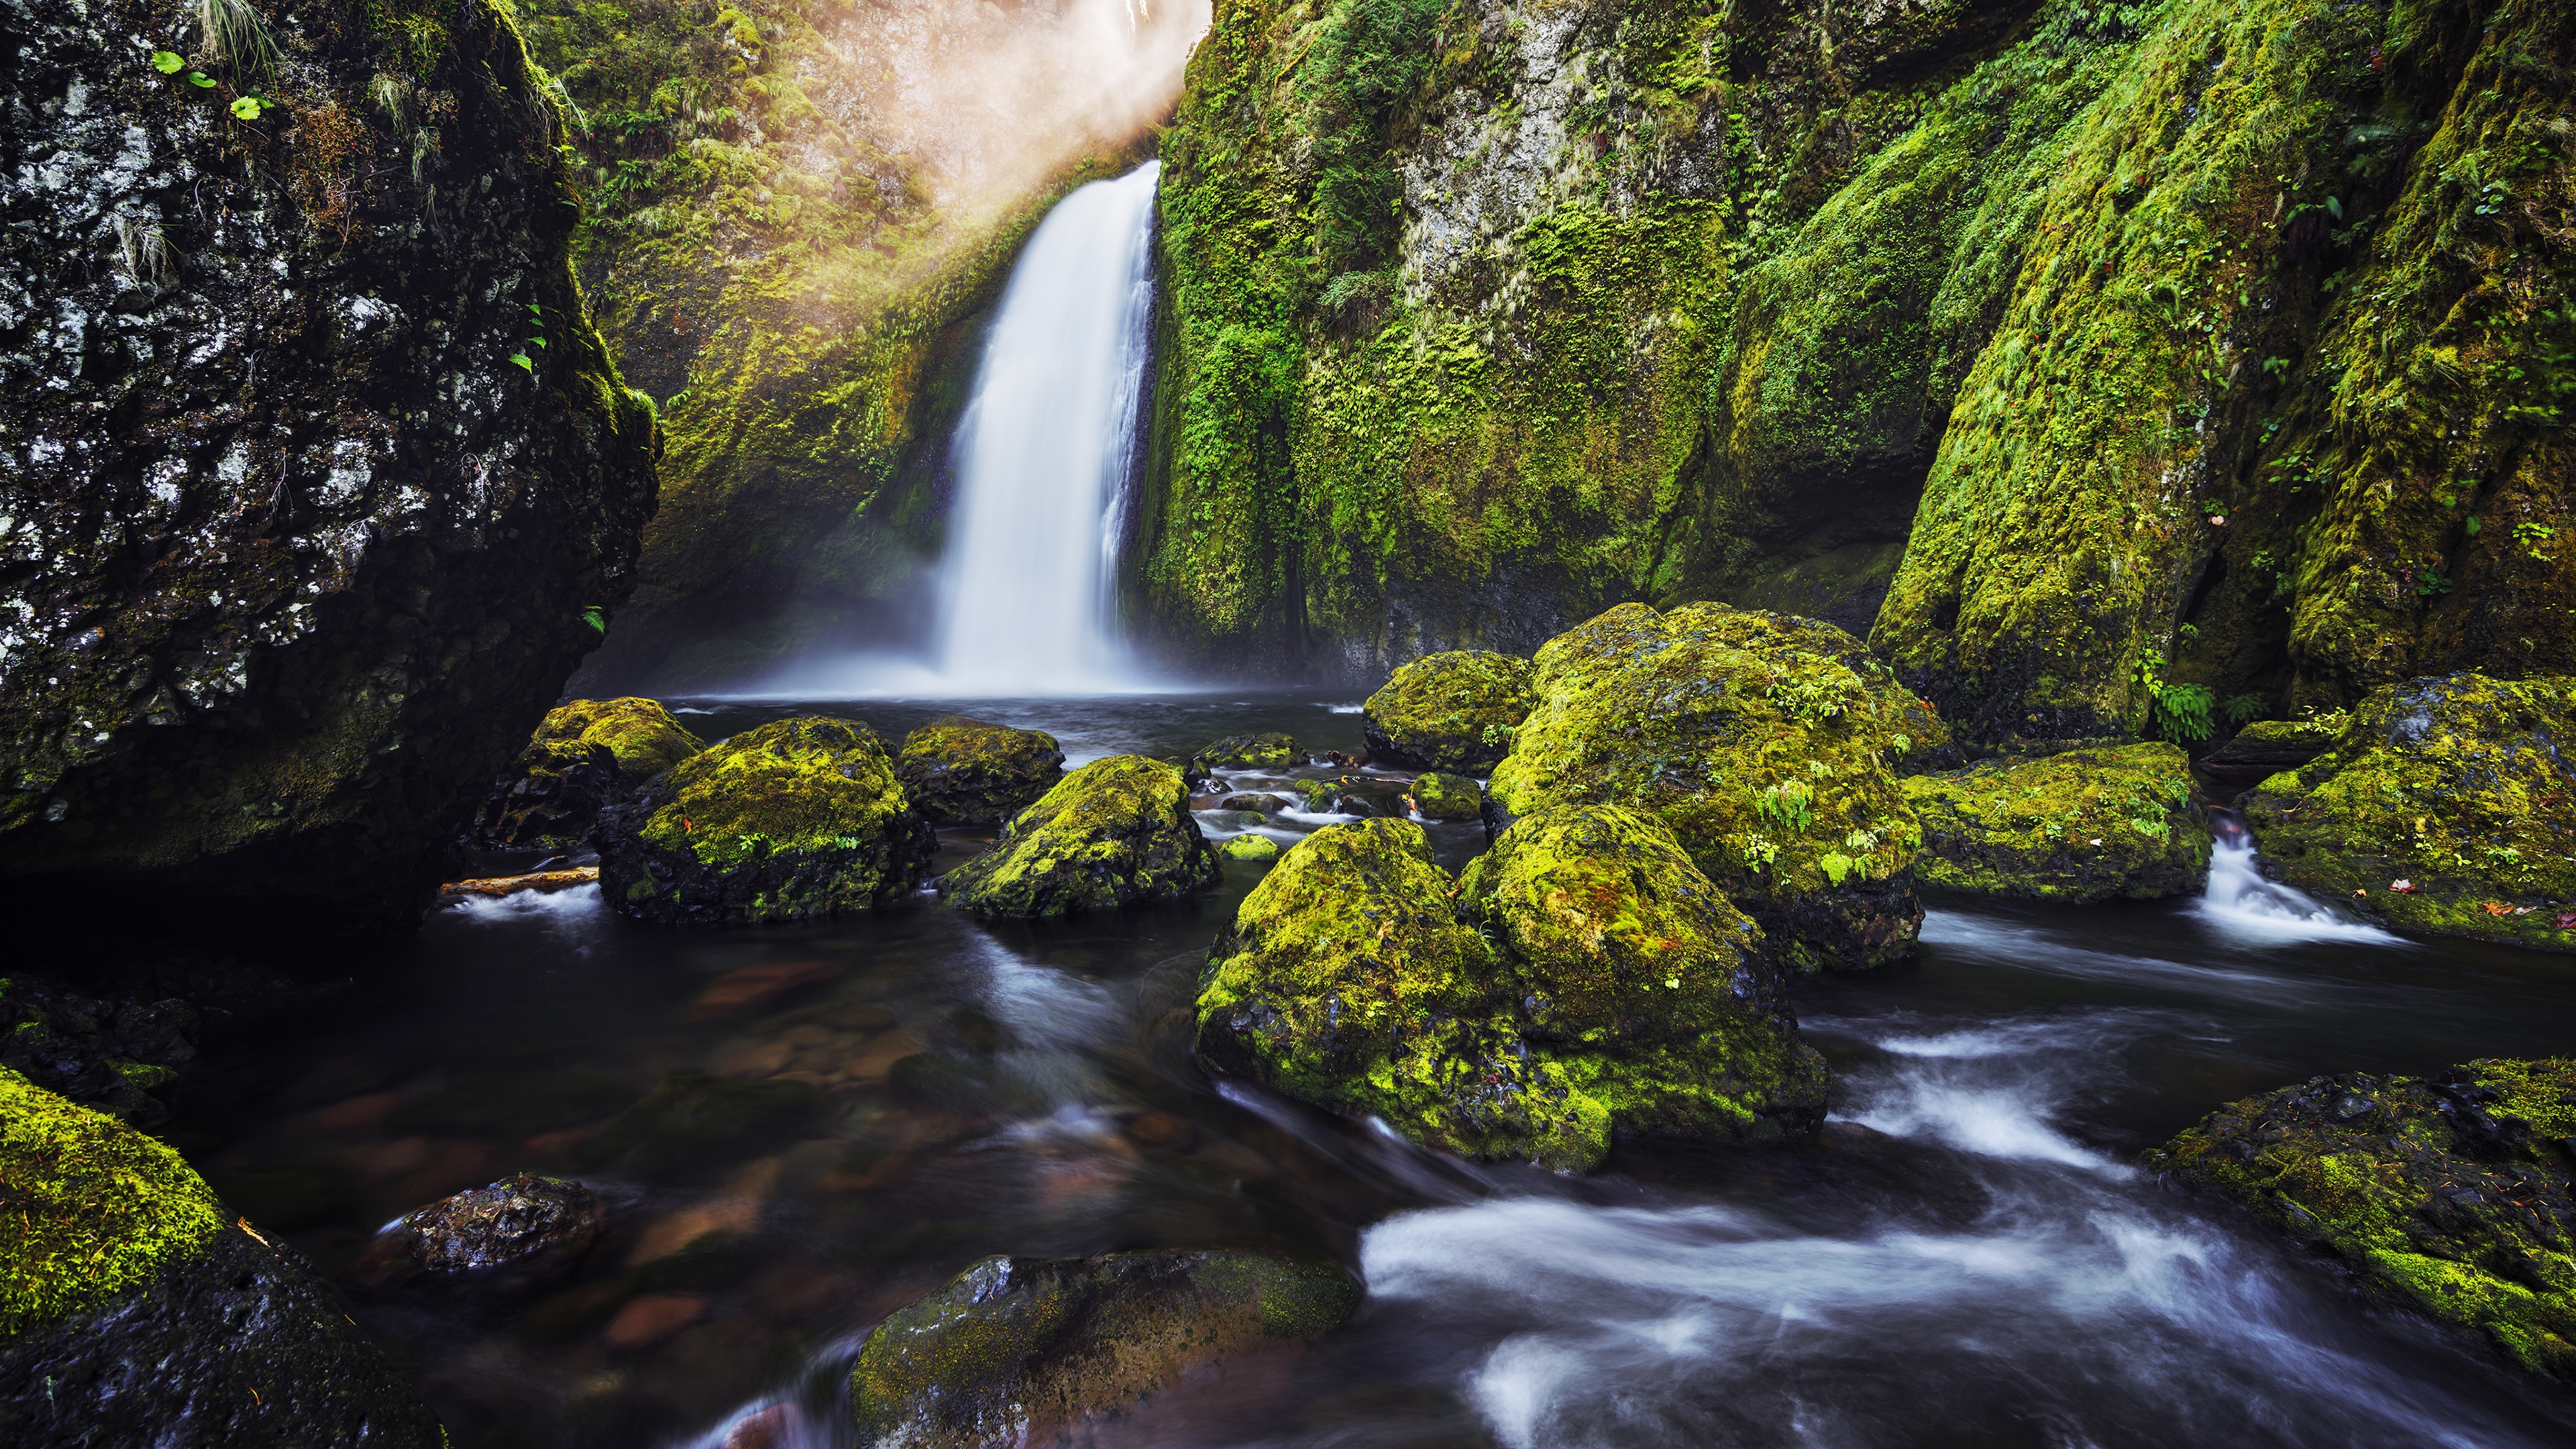 Green Mossy Rocks And Misty Water by Steve Daggar Photography